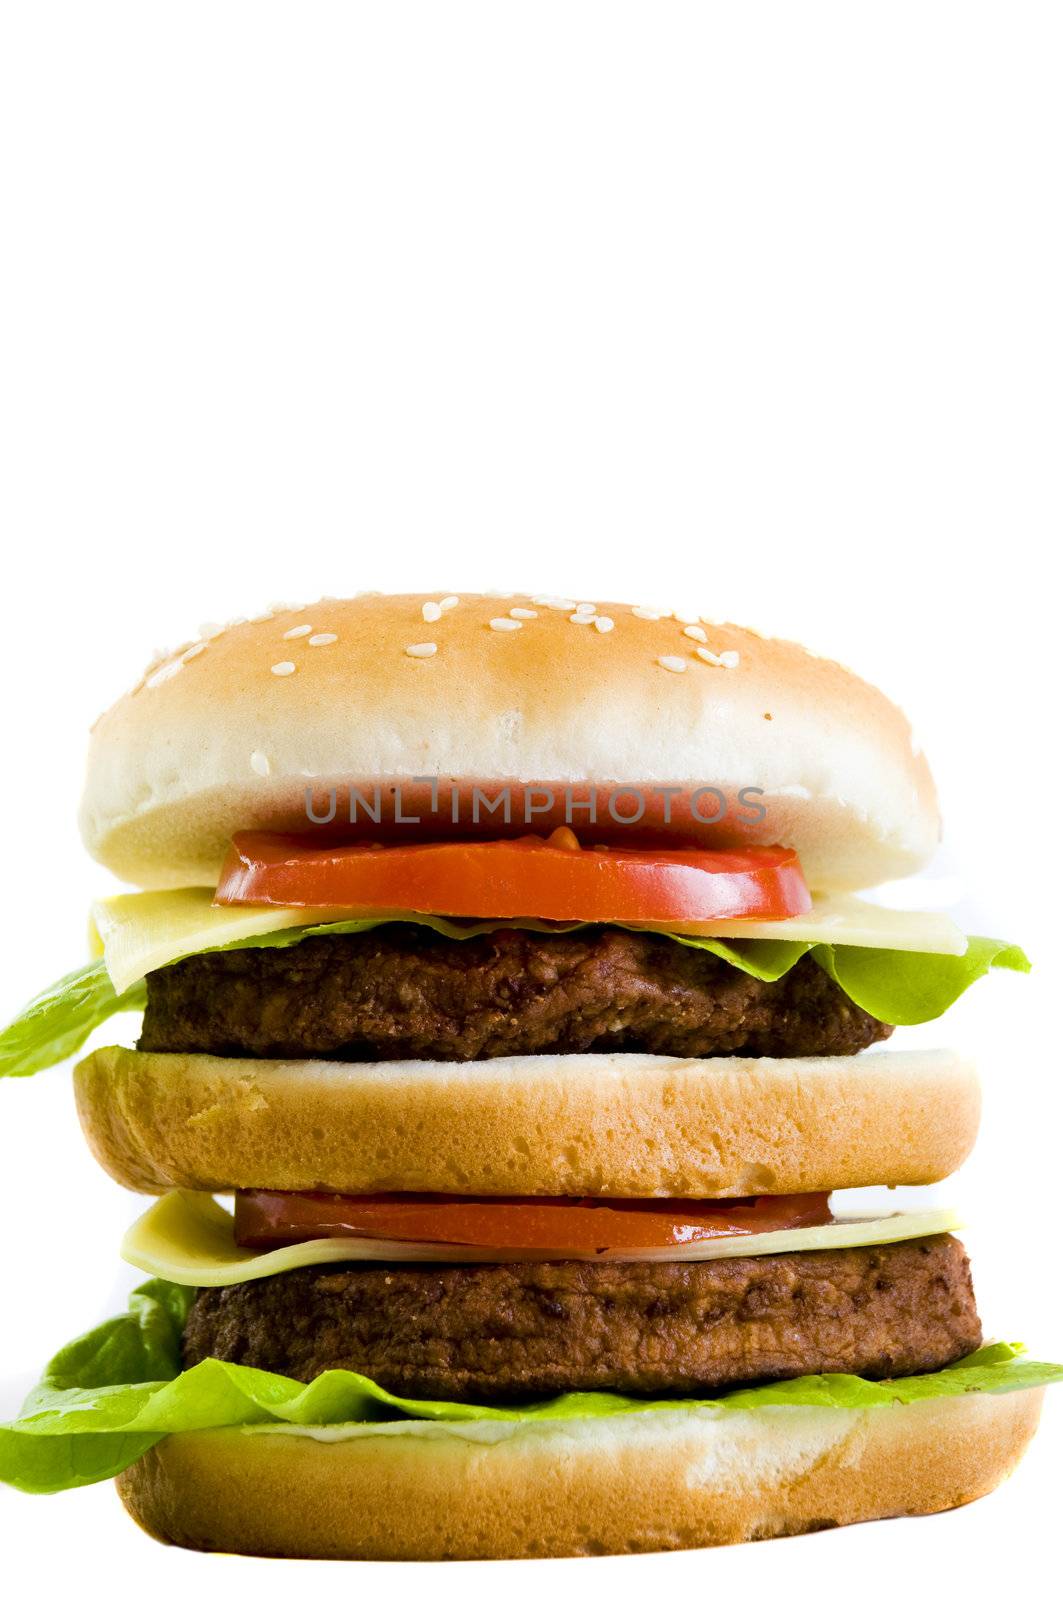 huge double cheeseburger, on white background